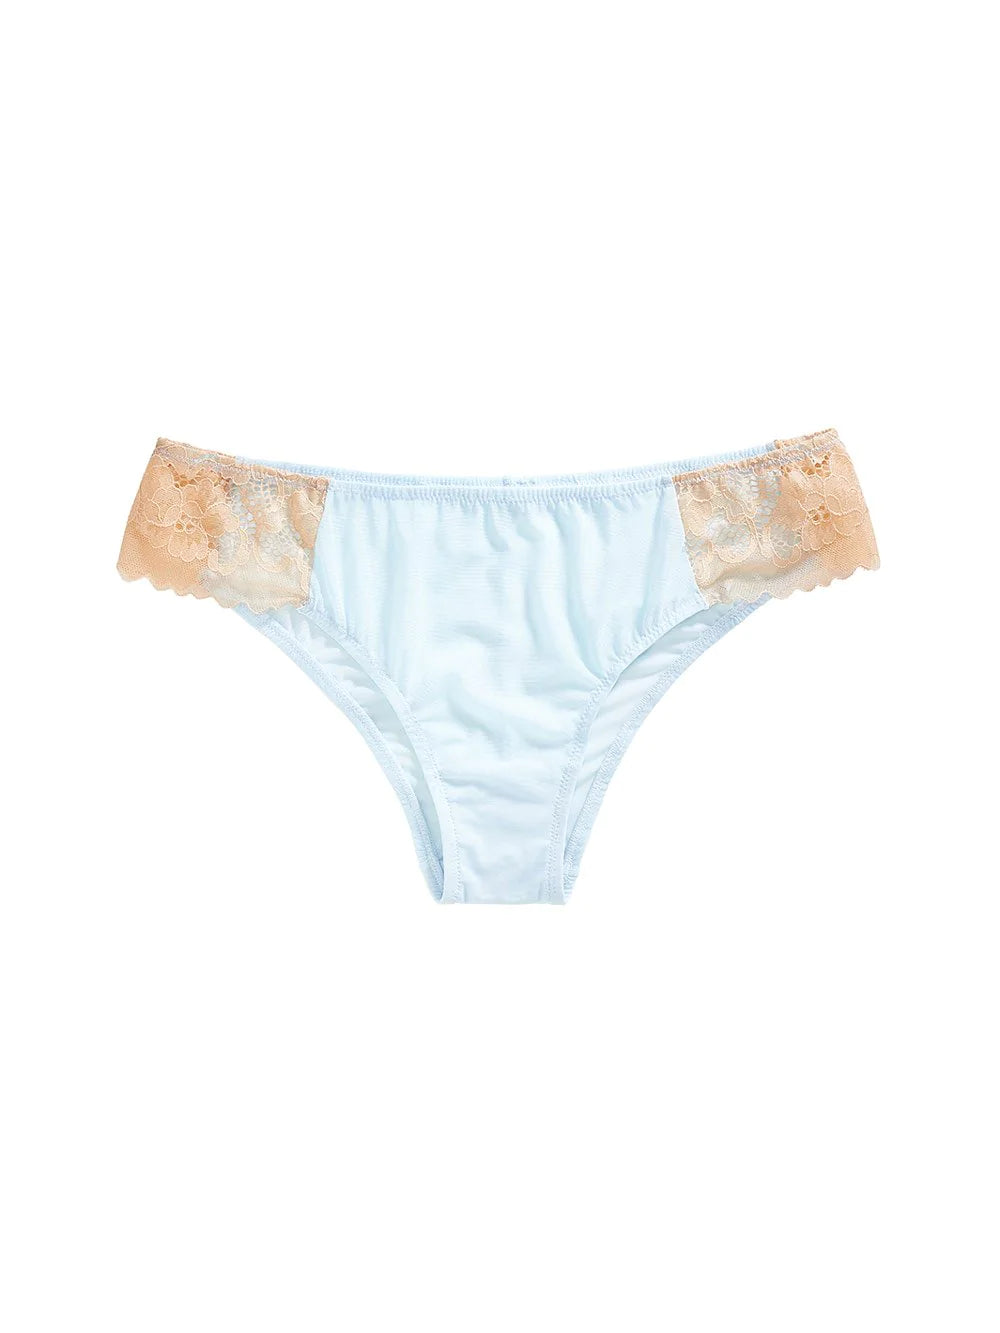 Courtney Panty- Baby Blue/Nude – intimatewhispersboutique